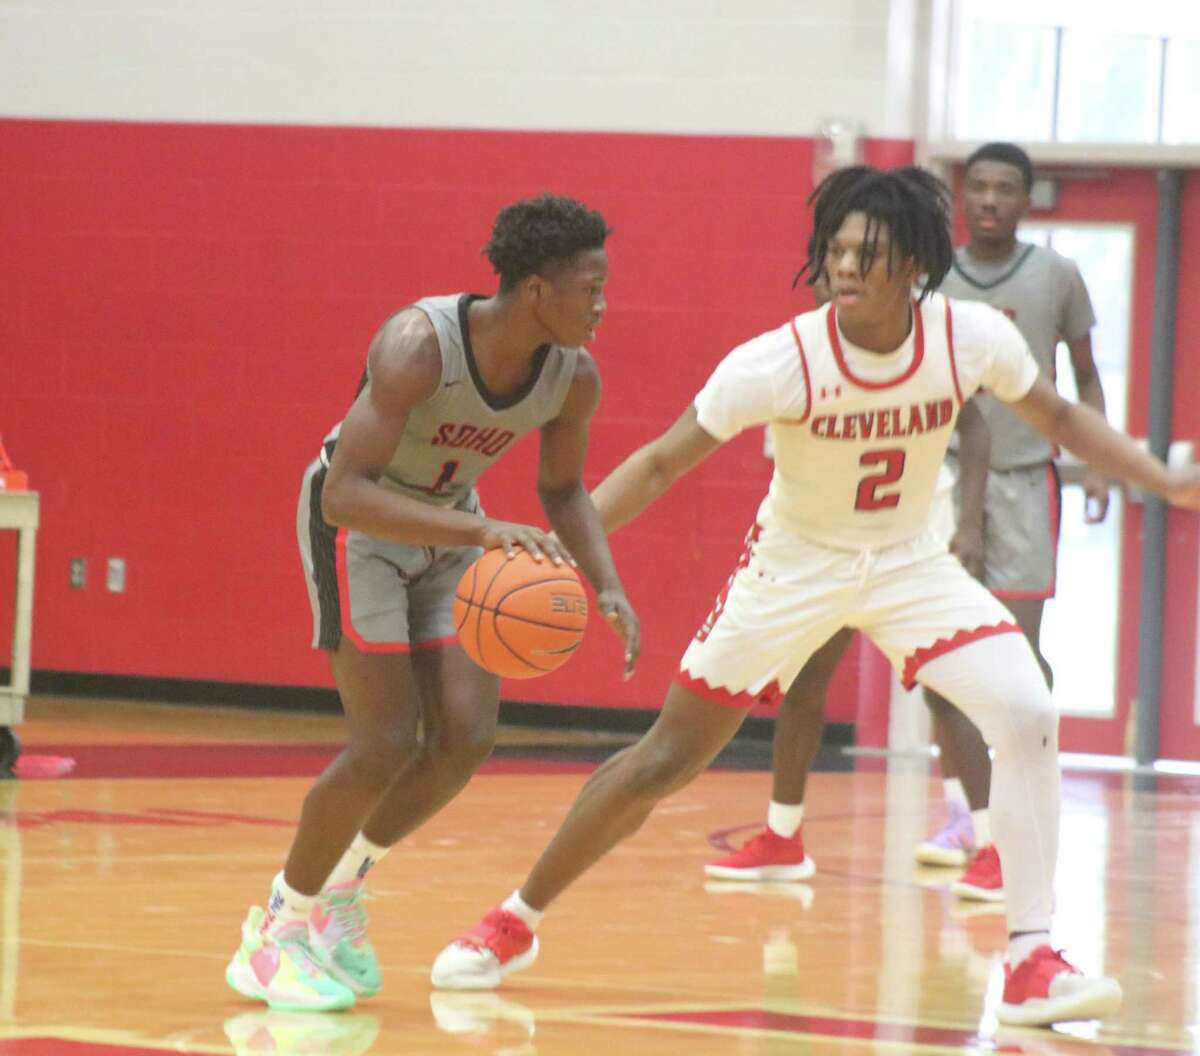 South Houston's Josh Larry confronts Devontae Robertson of Cleveland in their Medina Classic showdown Wednesday. Robertson scored 14 second-half points, but the Trojans held on to win 44-39.